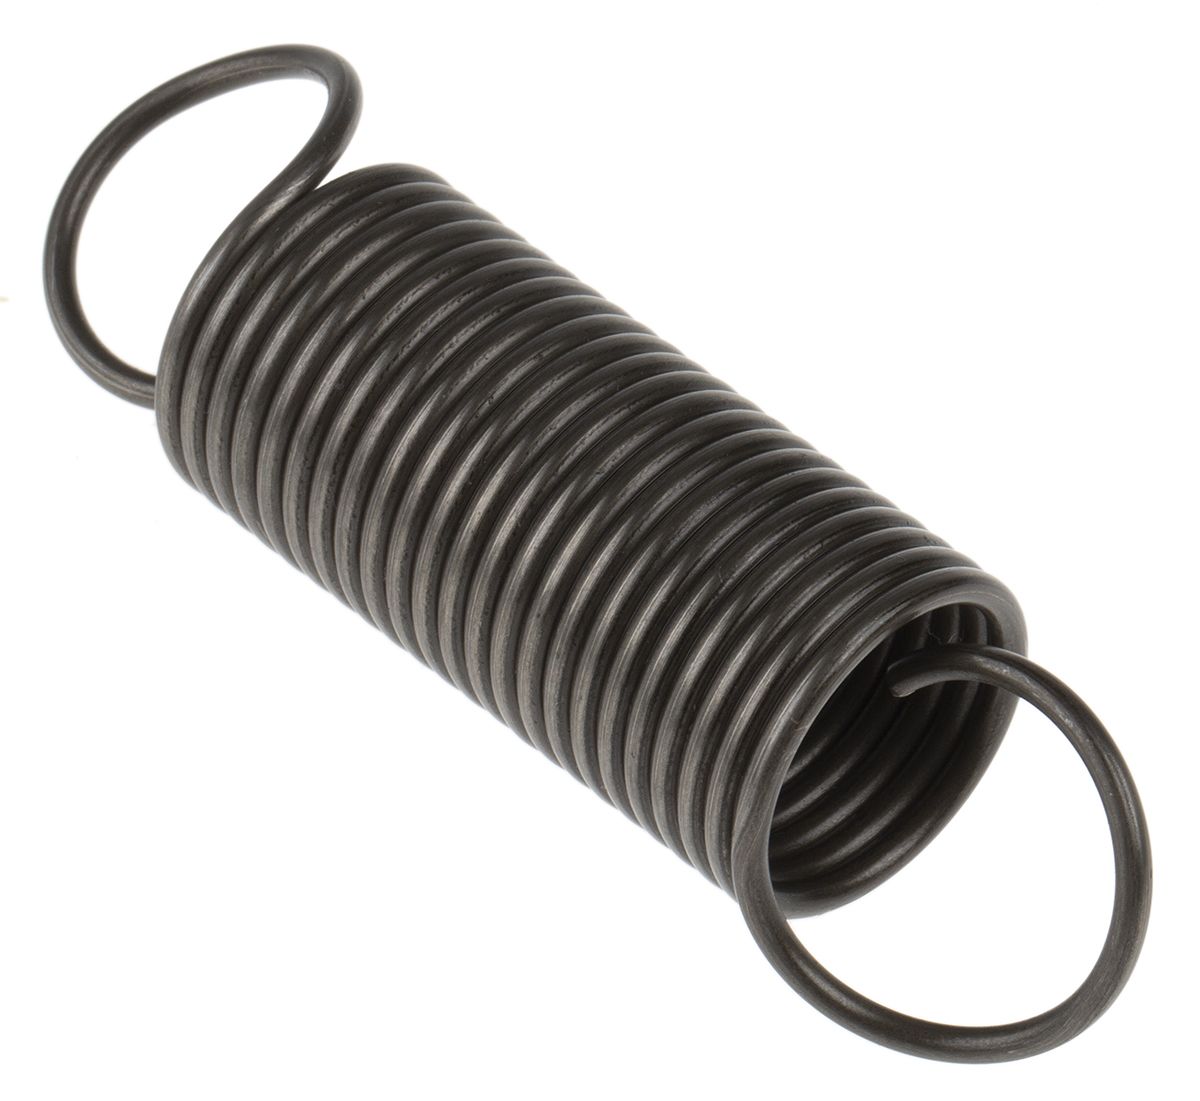 RS PRO Steel Extension Spring, 88.6mm x 24mm